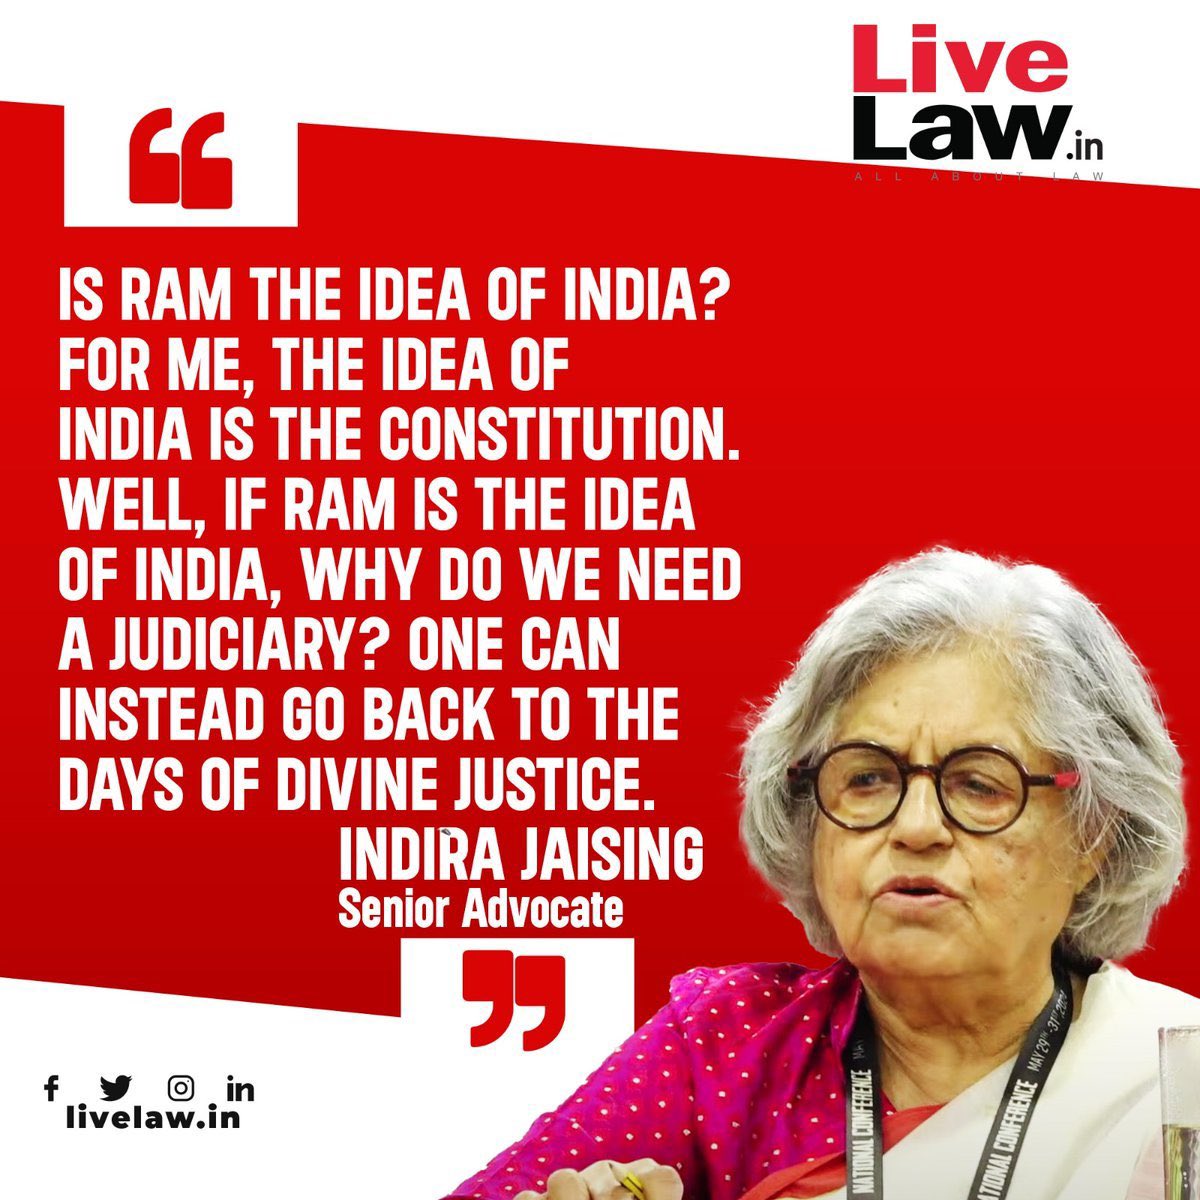 IS RAM THE IDEA OF INDIA? FOR ME, THE IDEA OF INDIA IS THE CONSTITUTION. WELL, IF RAM IS THE IDEA OF INDIA, WHY DO WE NEED A JUDICIARY? ONE CAN INSTEAD GO BACK TO THE DAYS OF DIVINE JUSTICE.

INDIRA JAISING

Senior Advocate
#SaveDemocracy_SaveIndia 
#GoBackModi